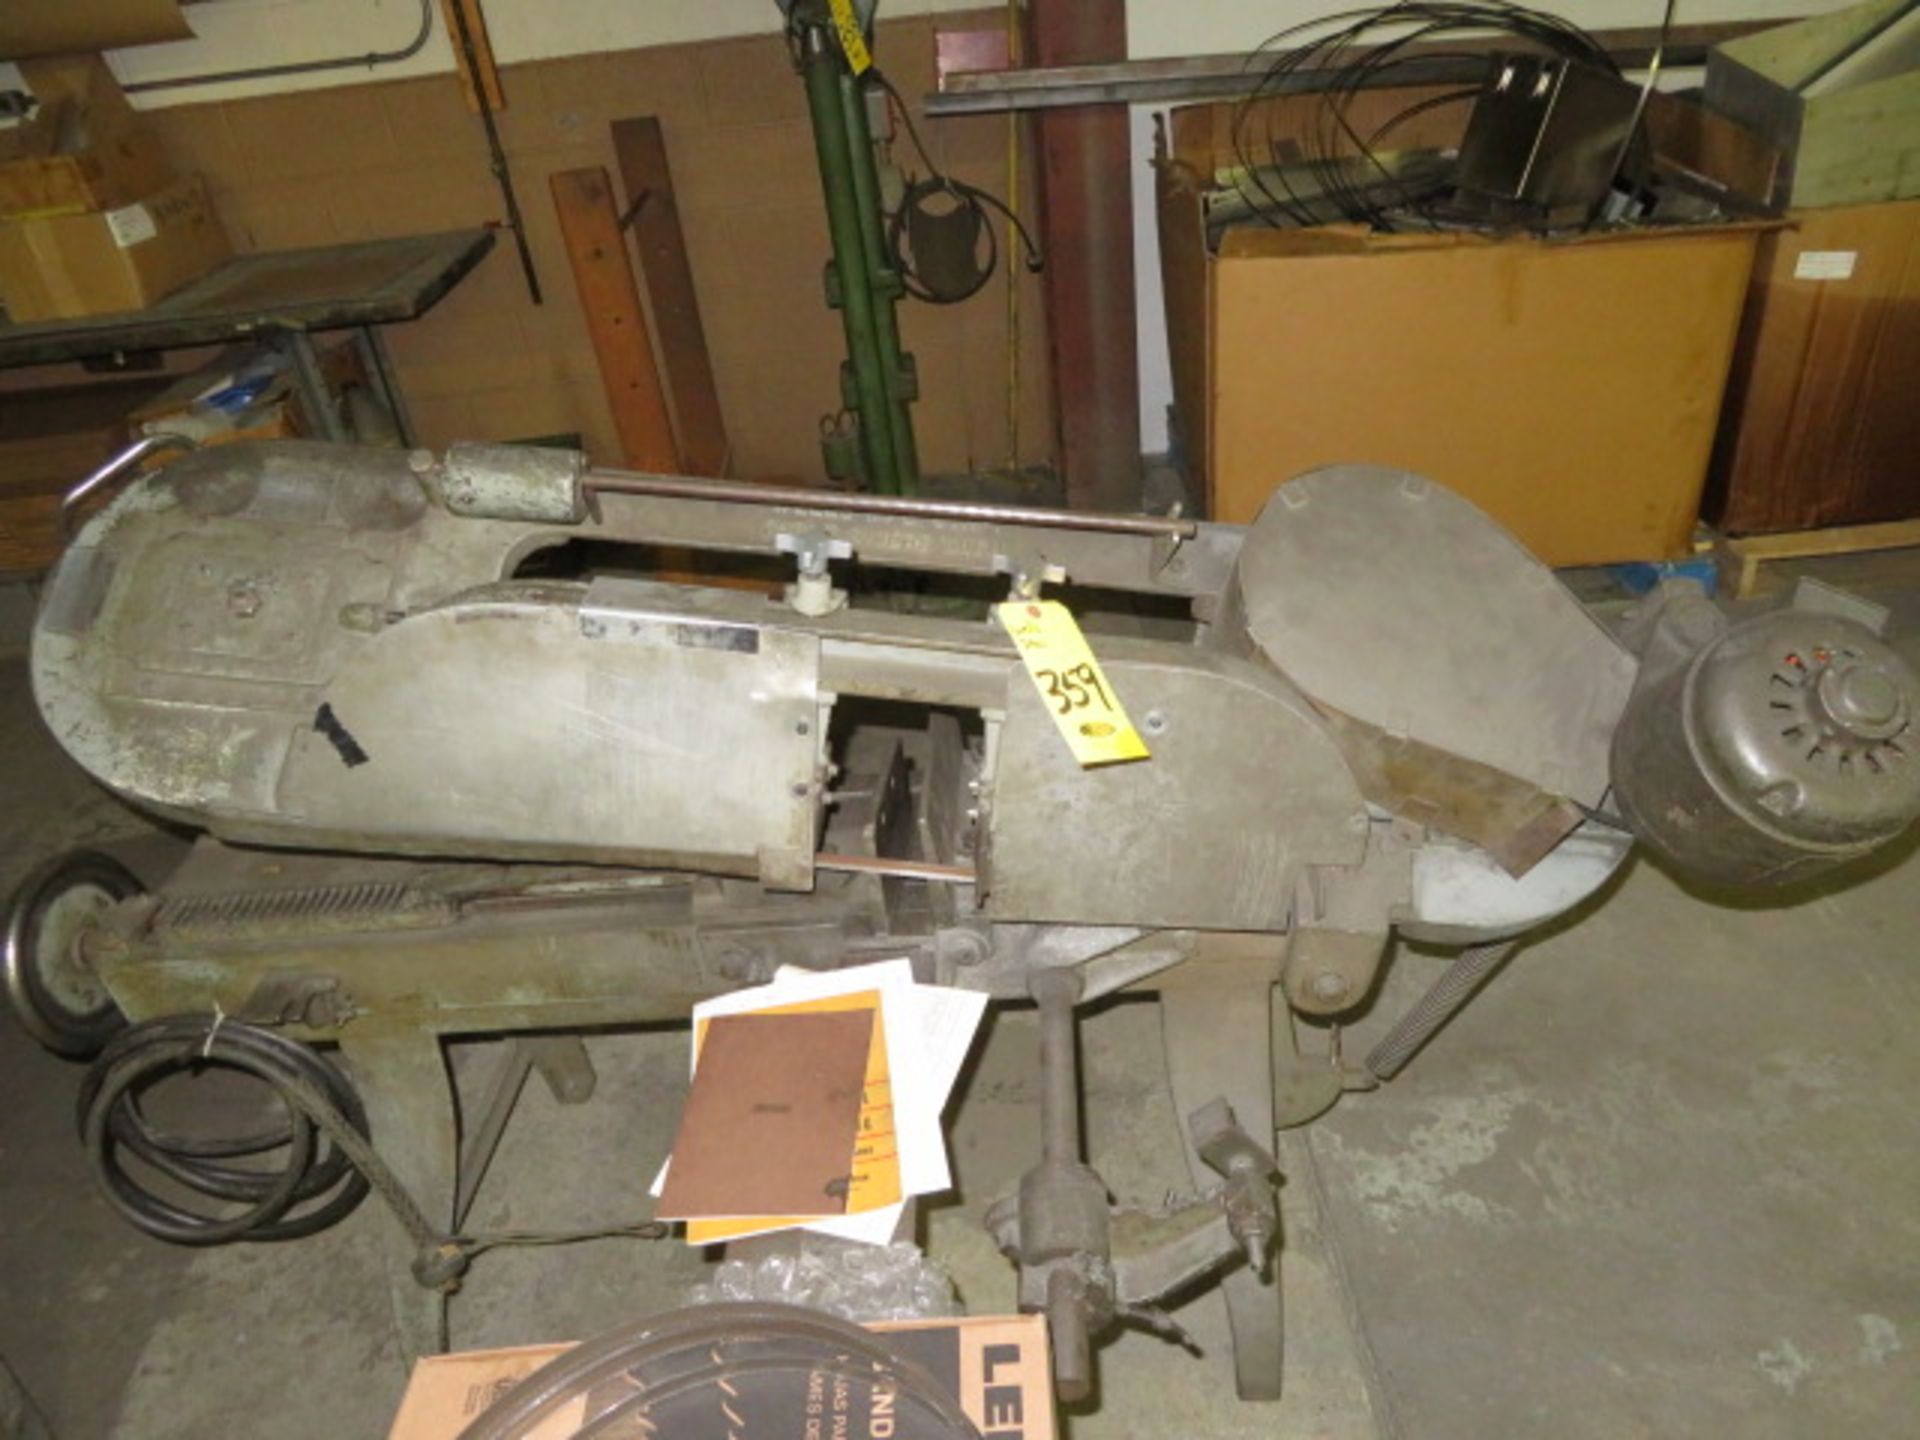 WELLS 8-M-43 HORIZONTAL METAL BAND SAW, S/N 5844, 8" X 16" WITH (2) NEW BLADES - Image 2 of 2